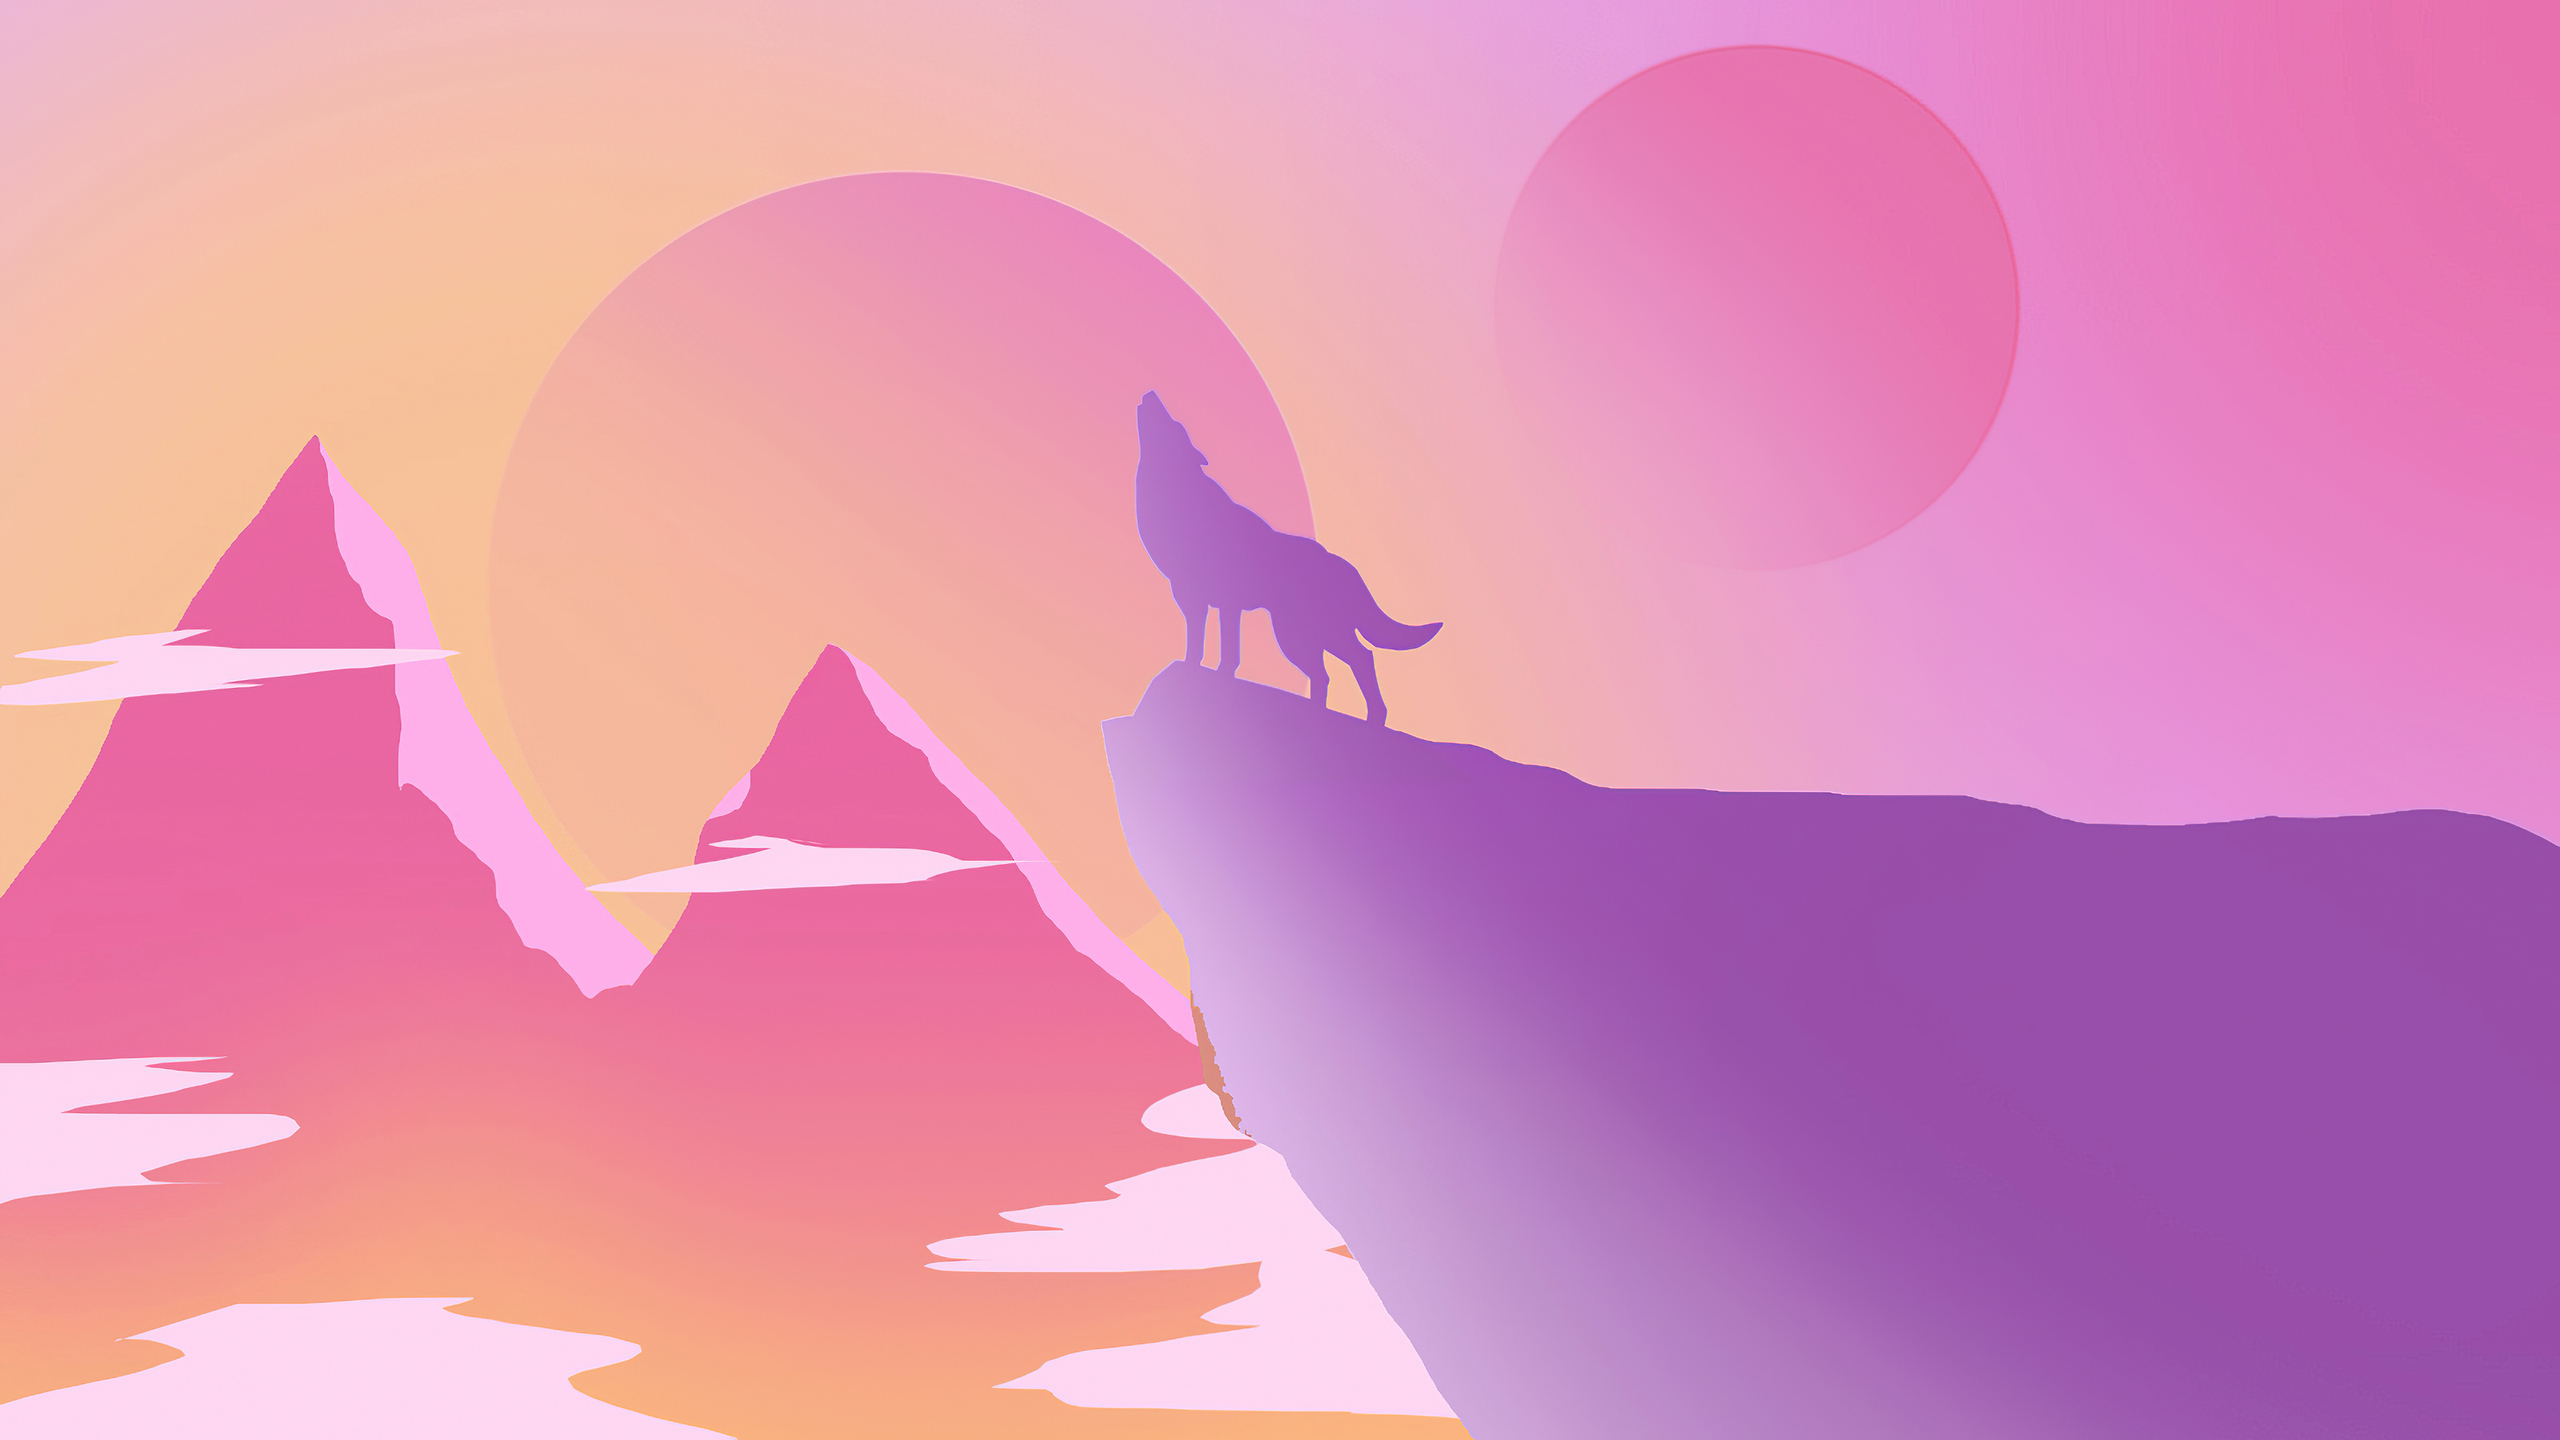 A wolf standing on top of the mountain - Wolf